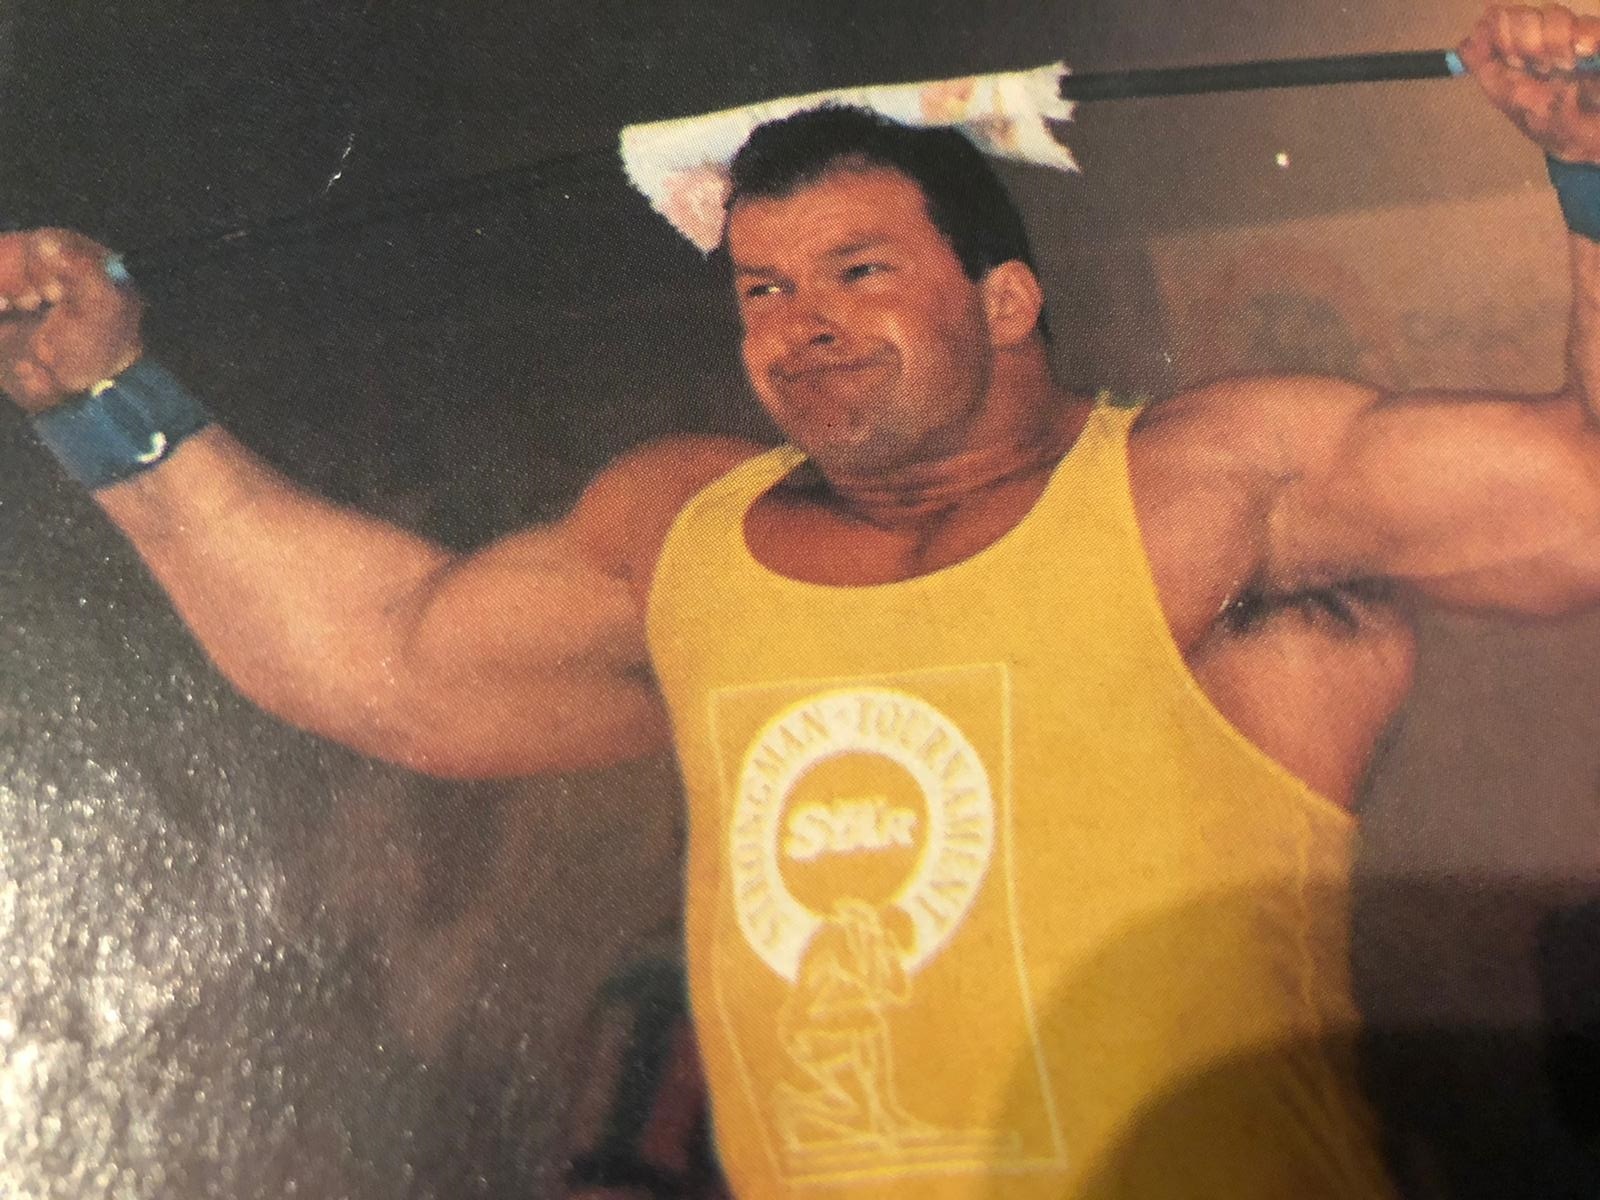 Former World S Strongest Man Competitor Lee Bowers 52 Dies Suddenly Lancashire Telegraph